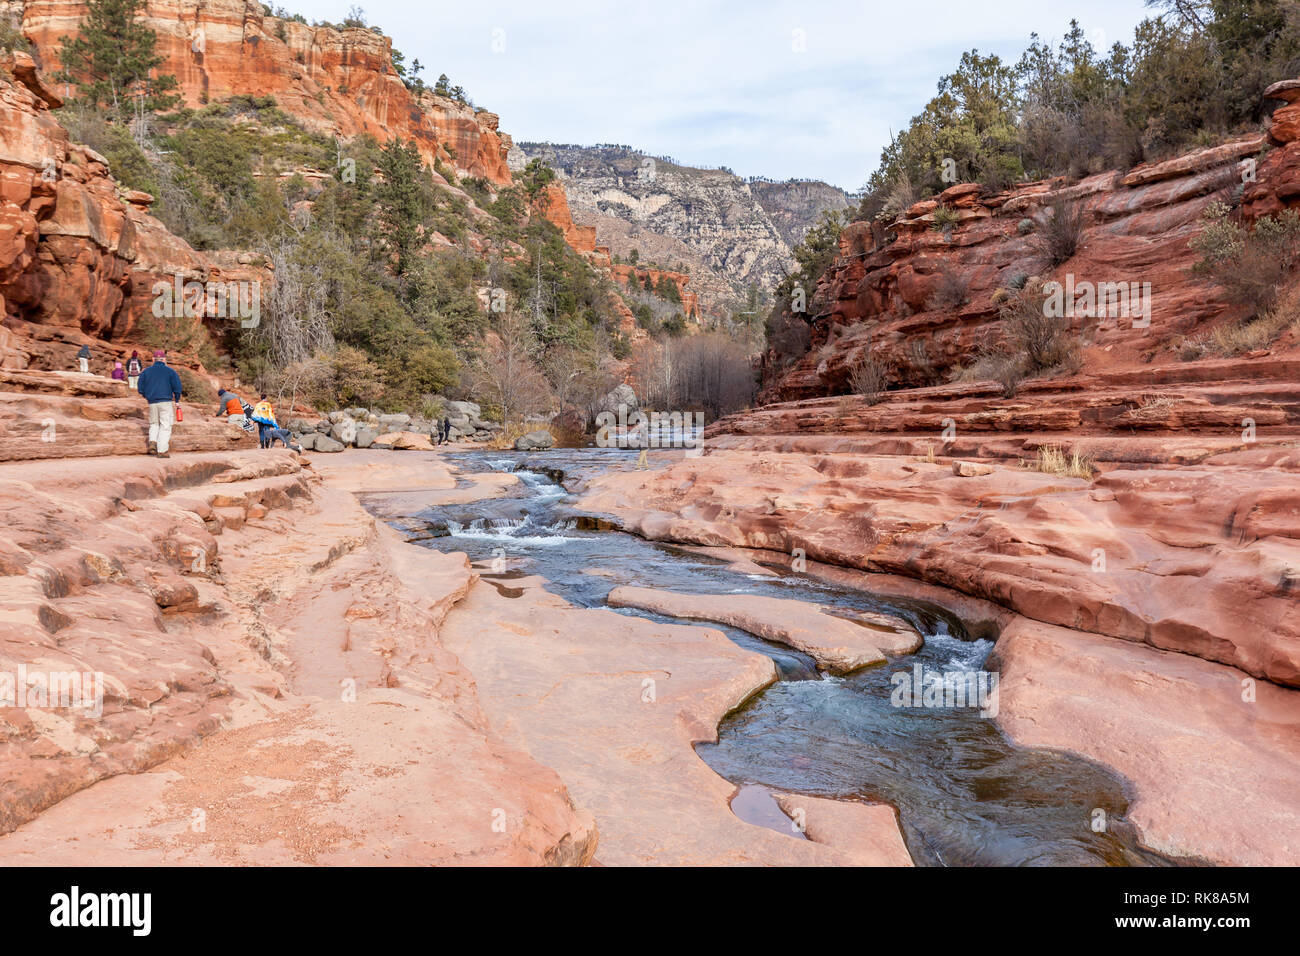 Slide Rock State Park is a state park of Arizona, USA, taking its name from a natural water slide formed by the slippery bed of Oak Creek. Stock Photo